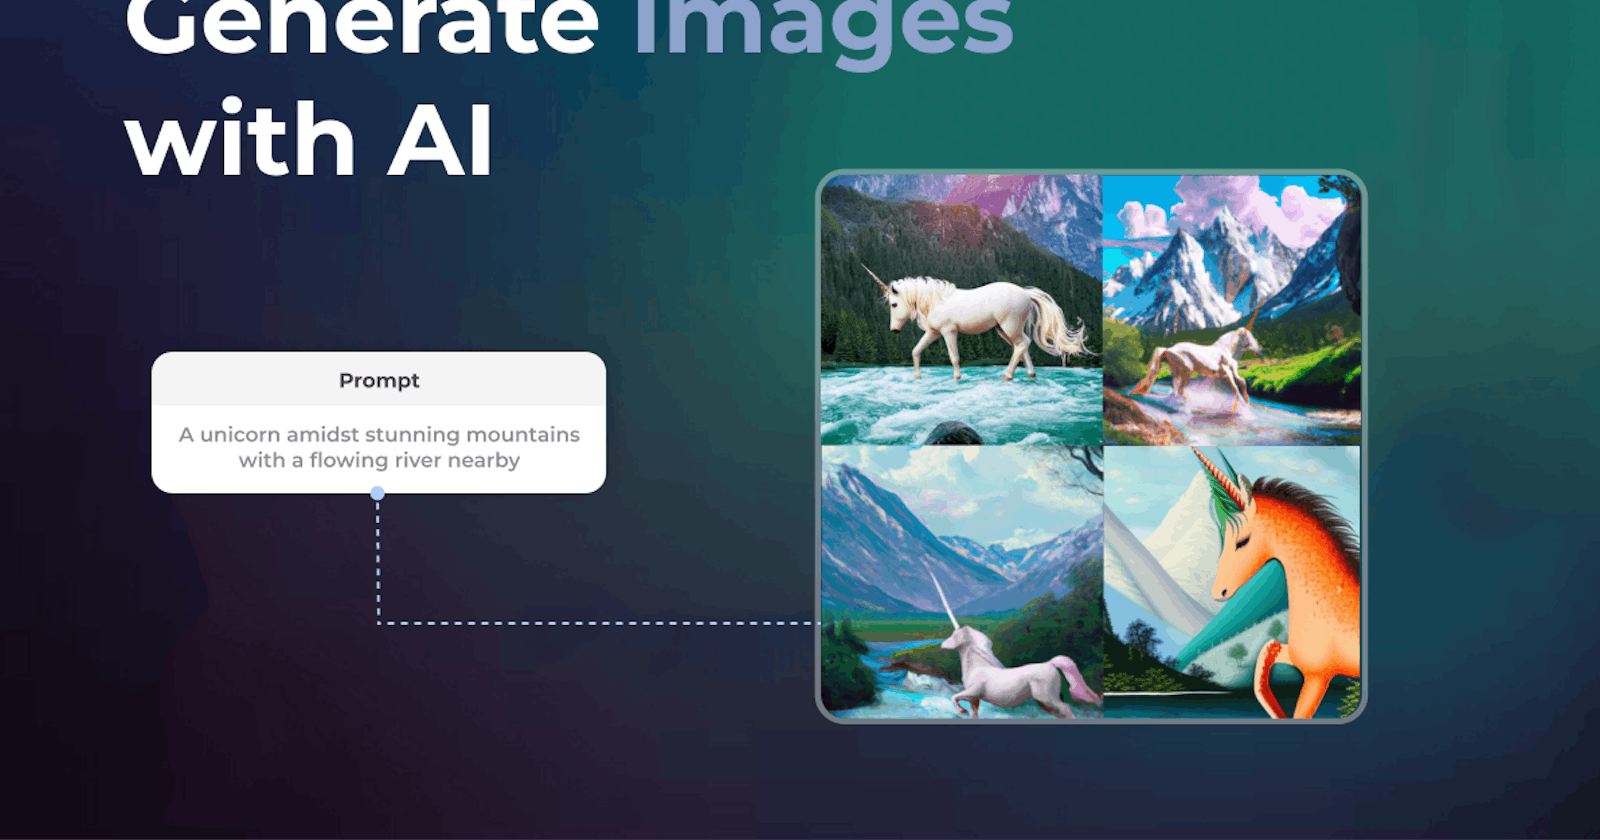 How to generate an image with AI?